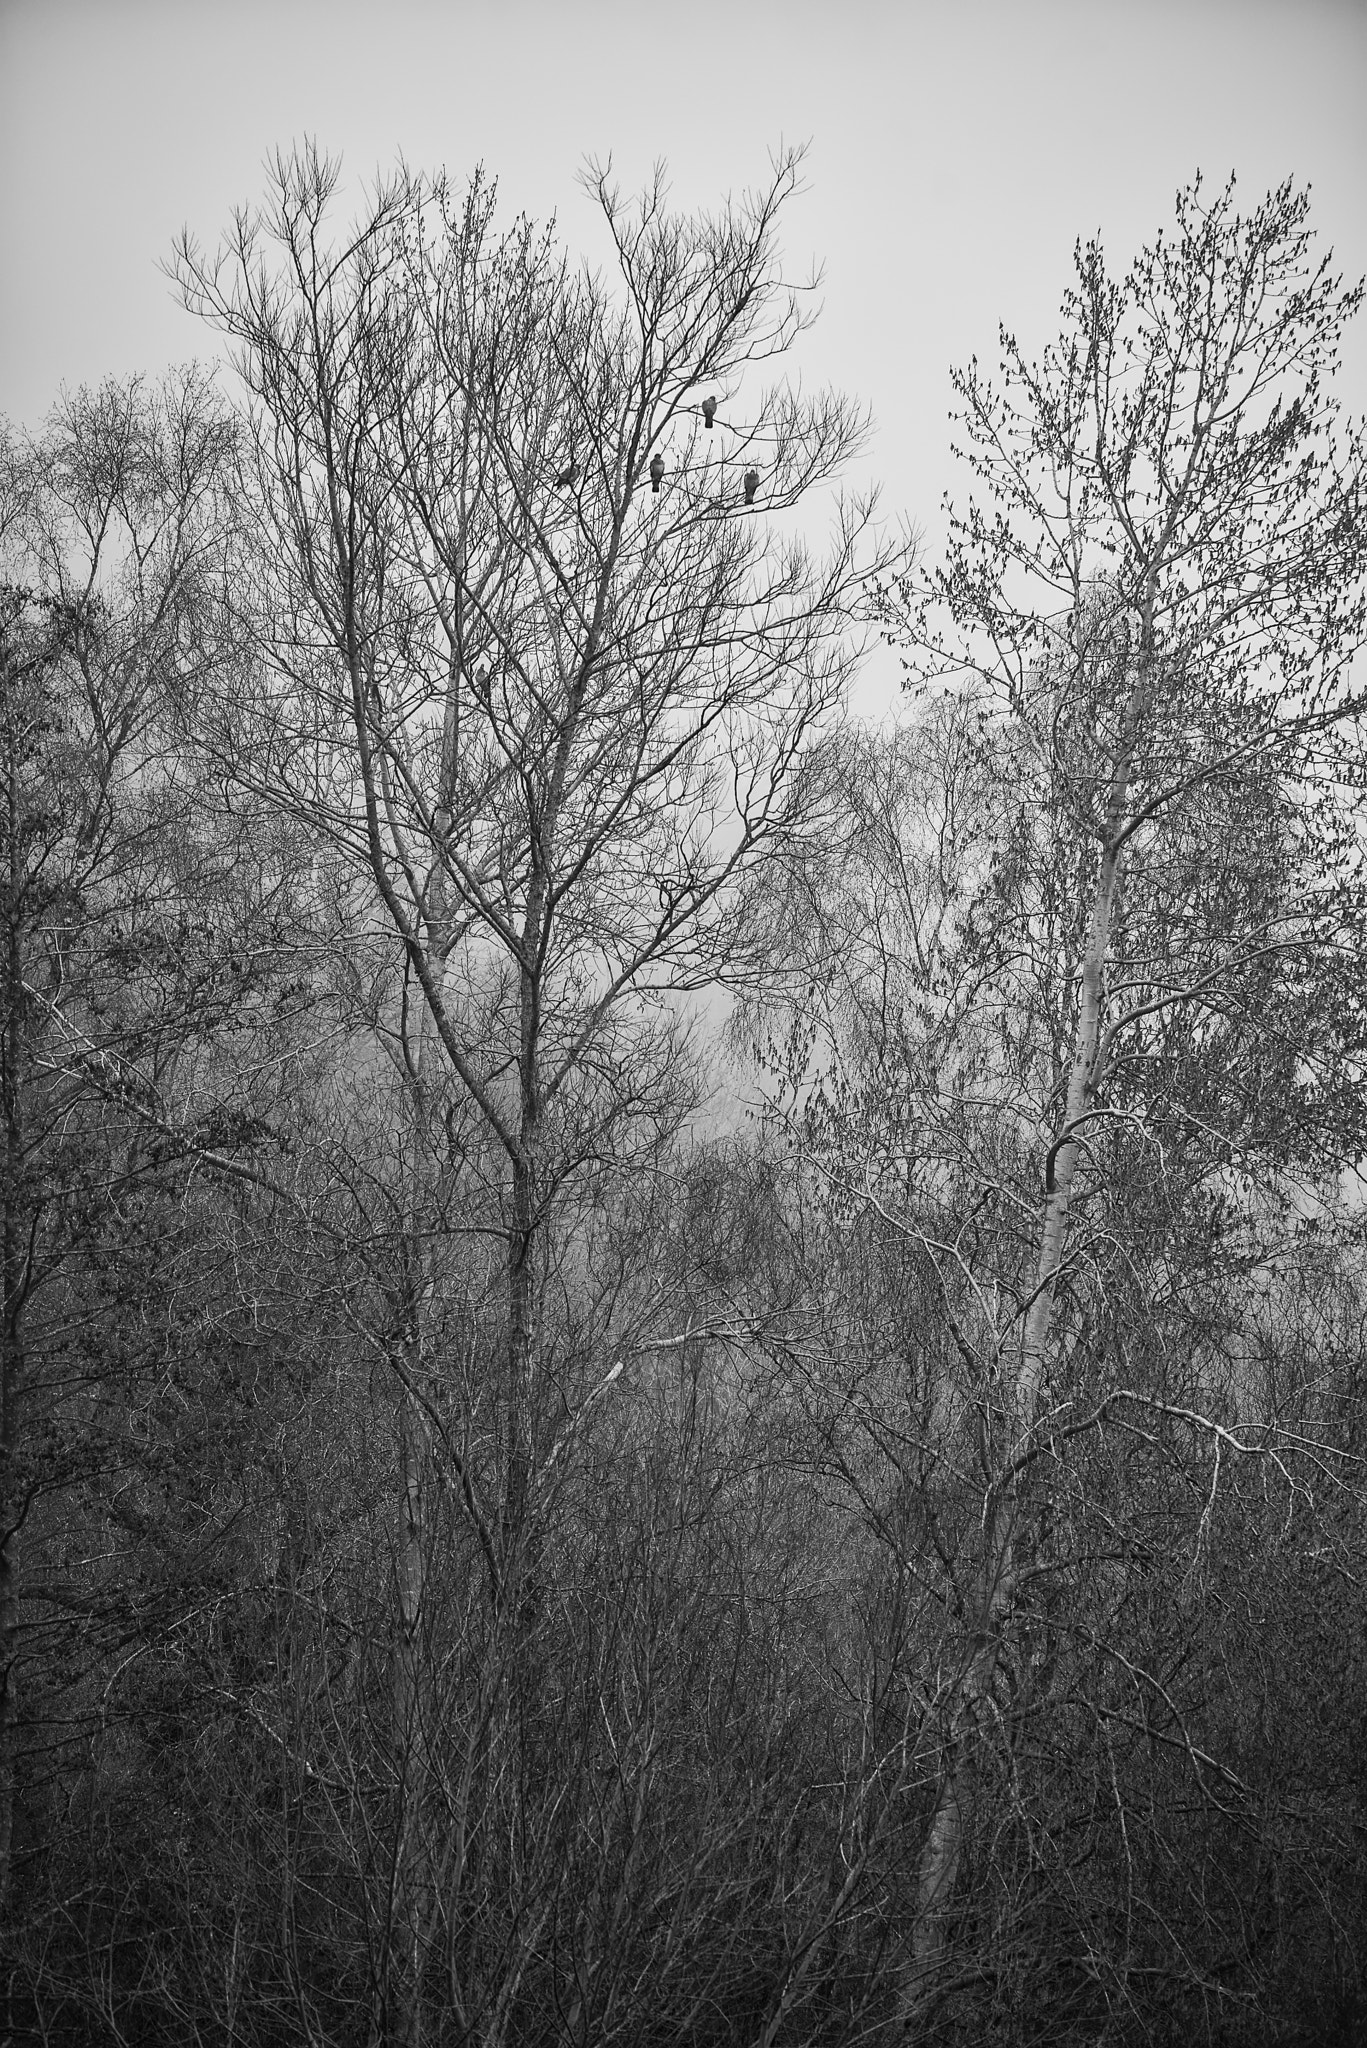 Nikon D800 + Sigma 150-600mm F5-6.3 DG OS HSM | C sample photo. Toned black and white landscape of foggy forest scene photography